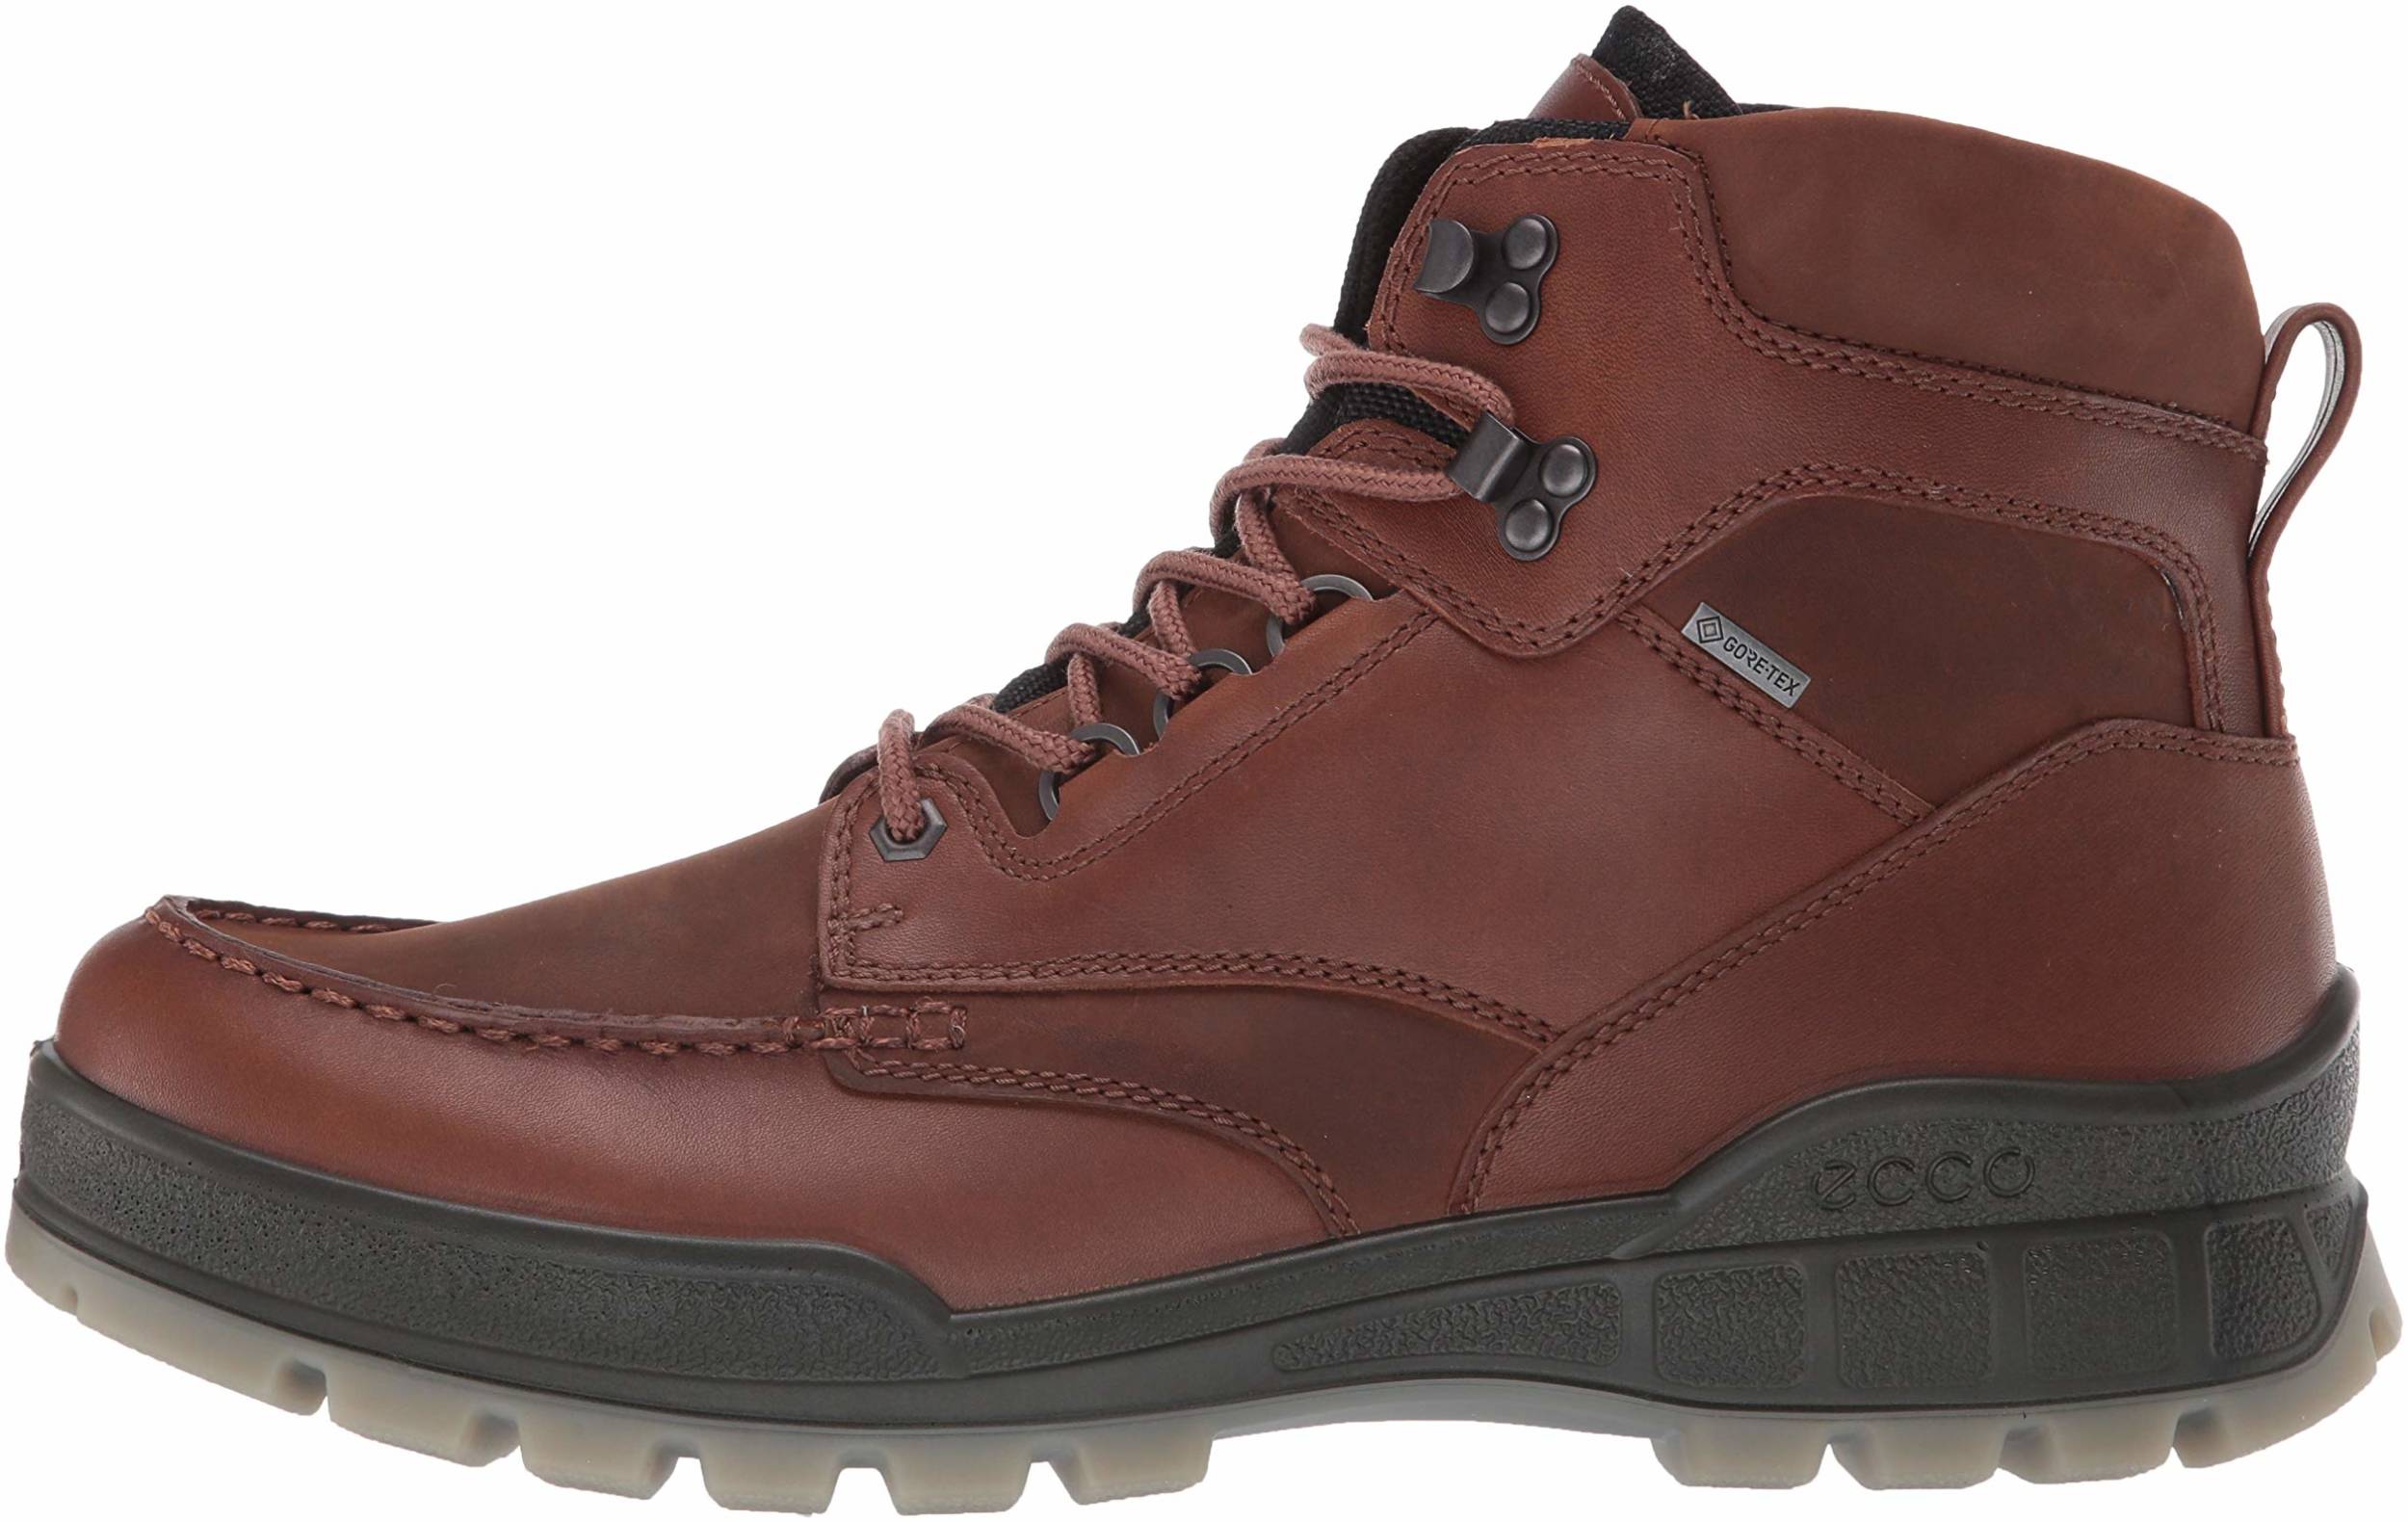 ECCO Track 25 Boot Review Facts, ($174) RunRepeat